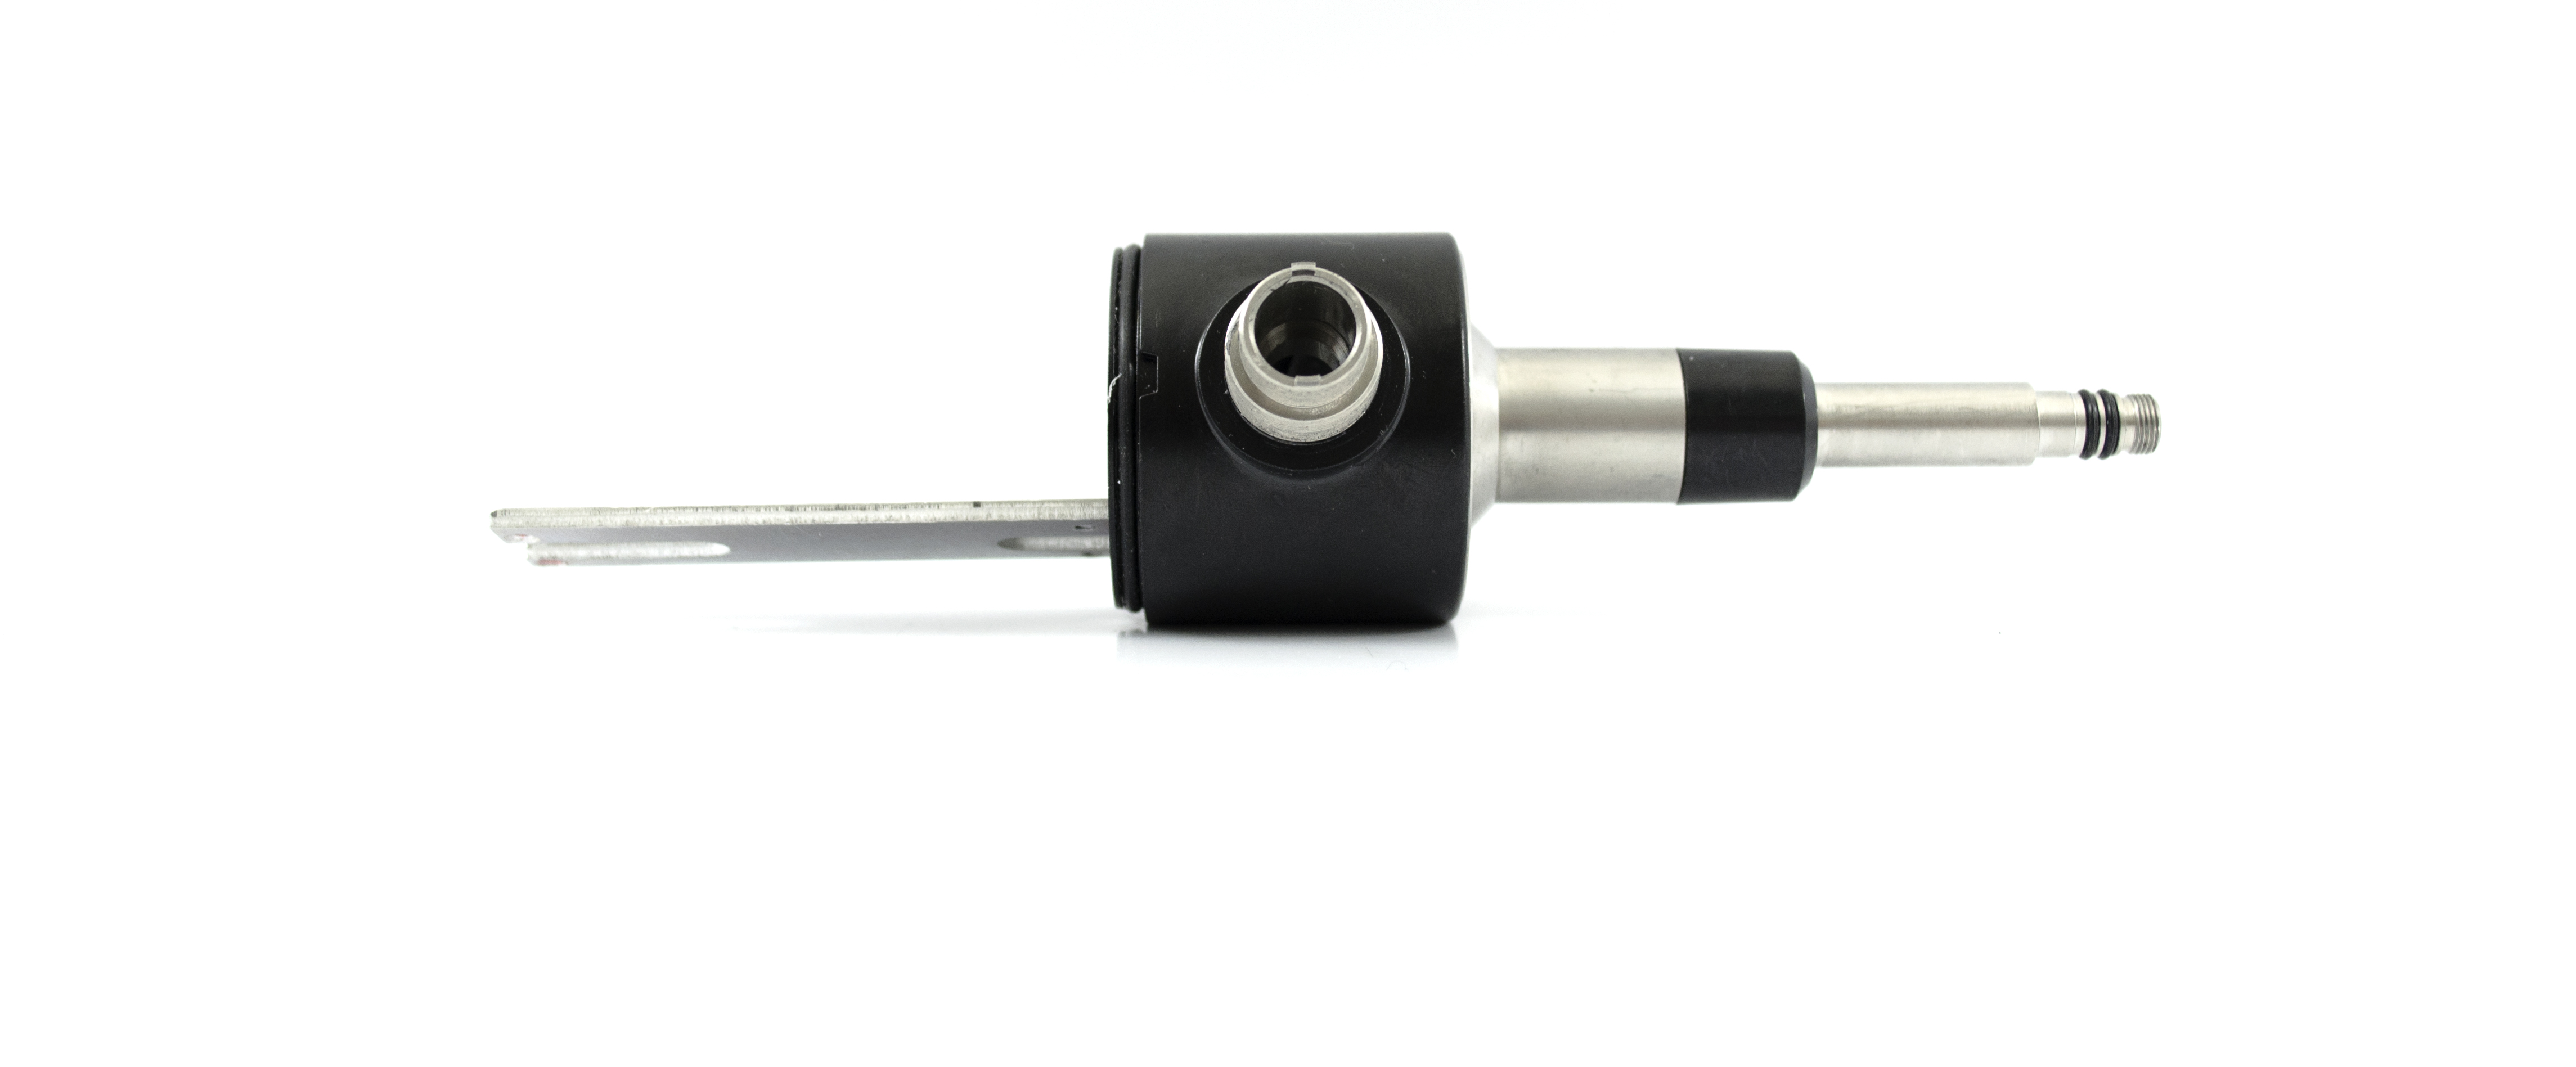 OEM Connector Body Sub-Assembly - CYF-VH, CYF-VHR (ETO Valve Attached)